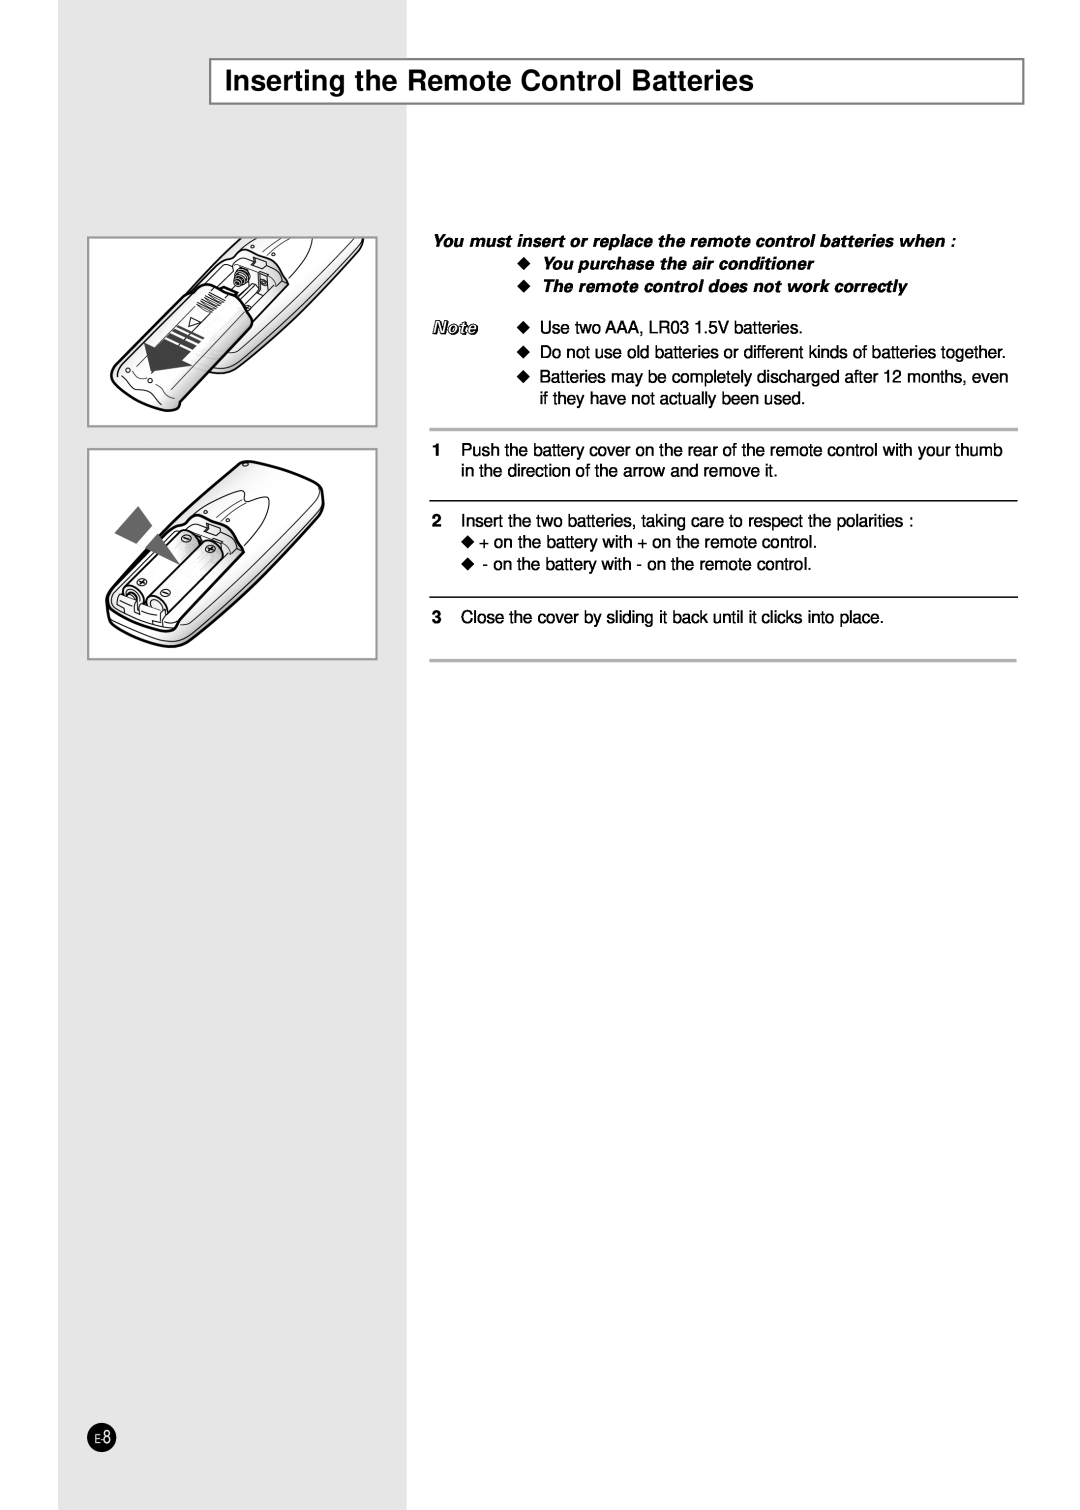 Samsung SH12ZA1 manual Inserting the Remote Control Batteries, You must insert or replace the remote control batteries when 